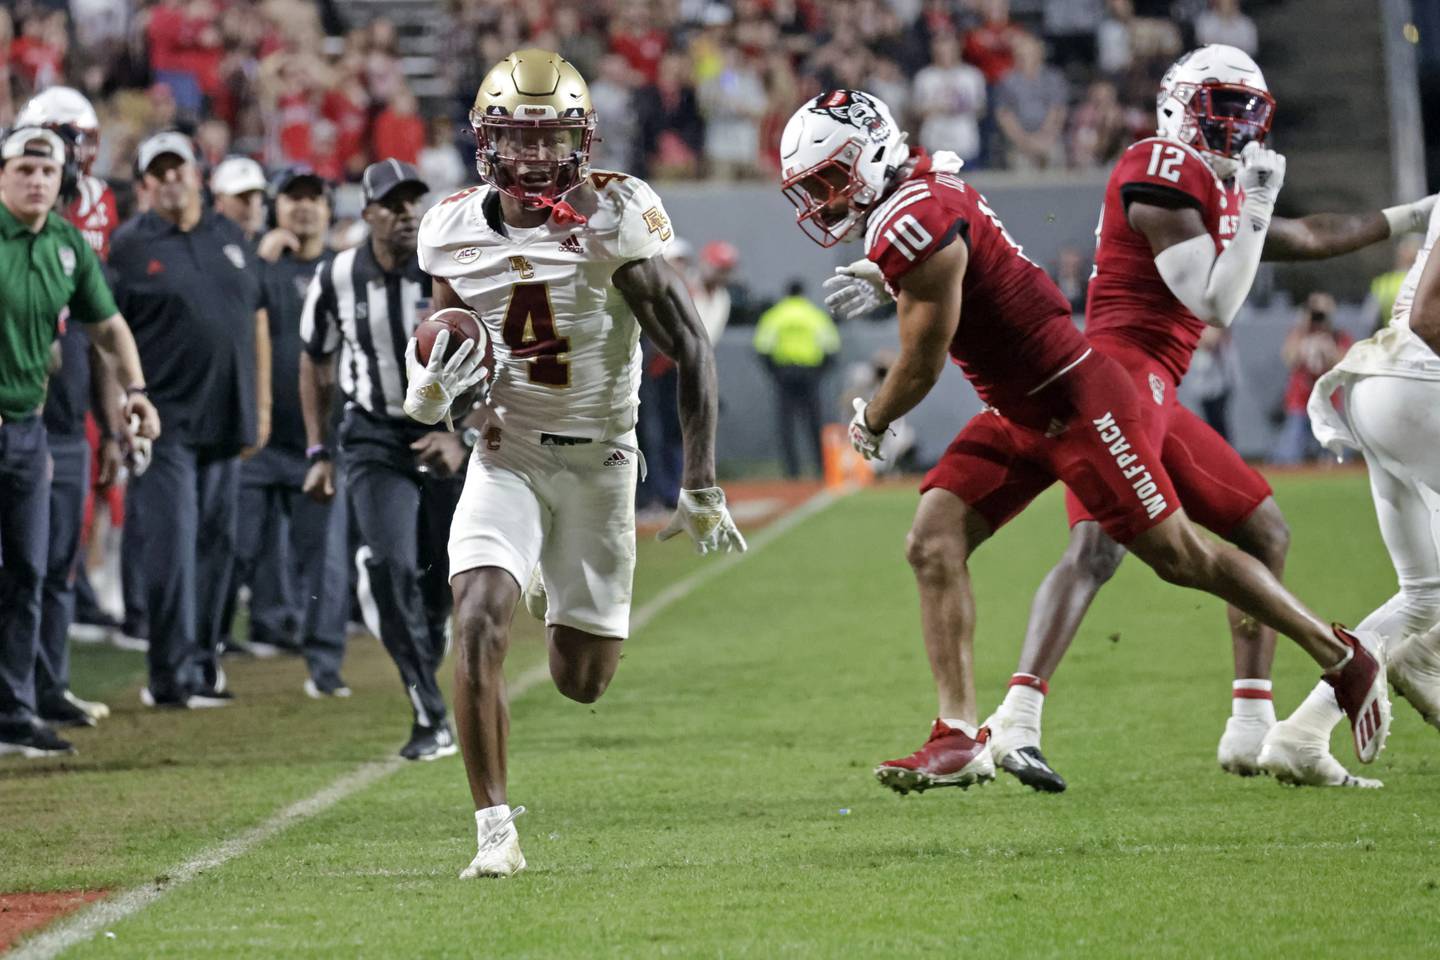 Boston College wide receiver Zay Flowers gets past North Carolina State safety Tanner Ingle en route to a touchdown reception Saturday in Raleigh, N.C. 